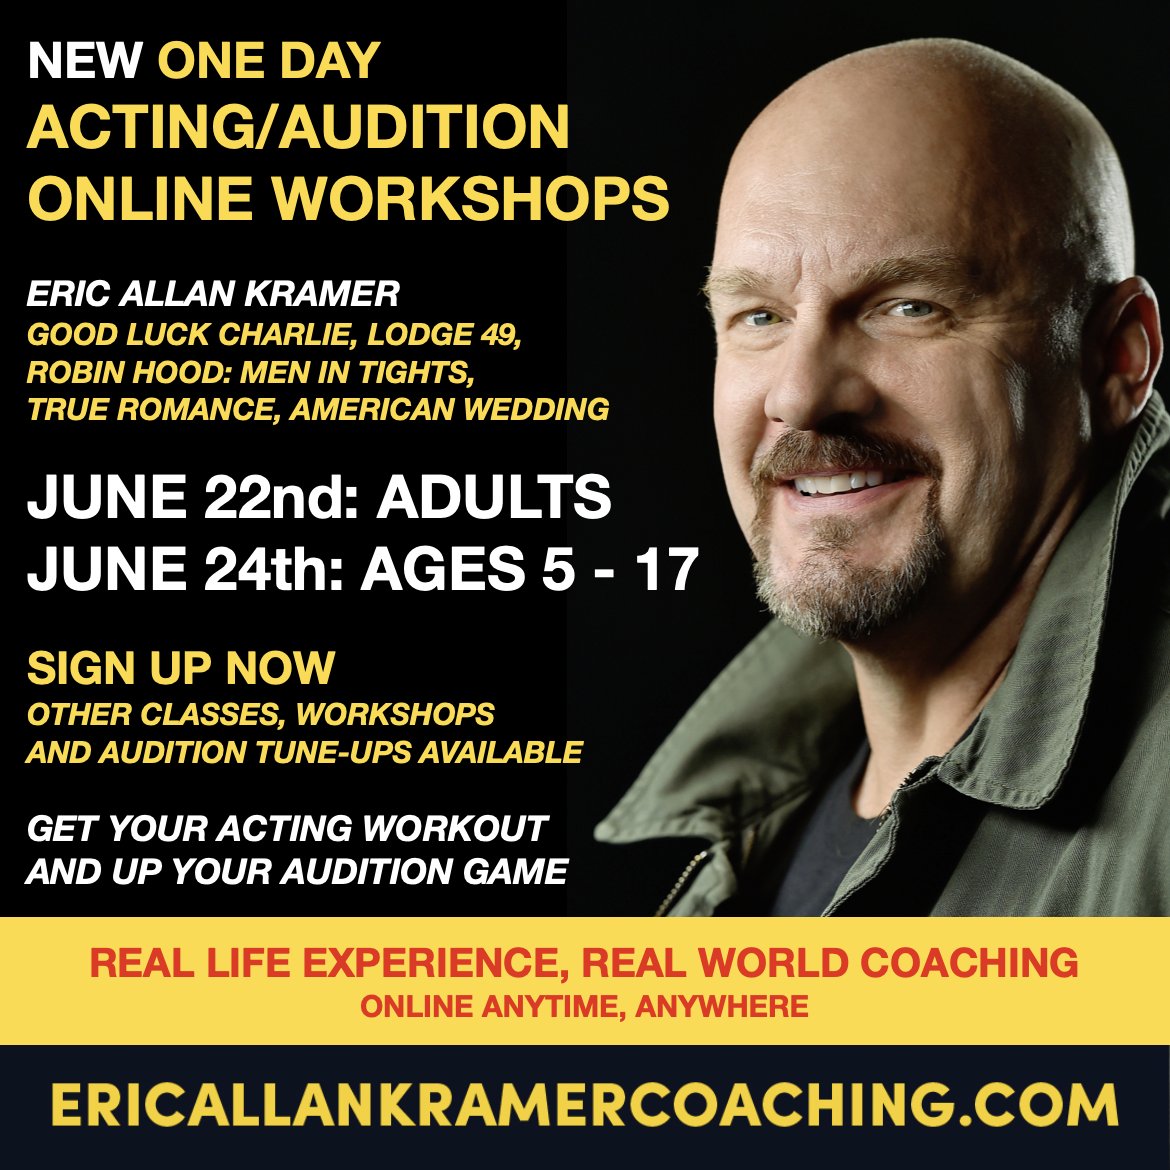 Now is the time to get on top of your audition game so you're ready... Check out the site and get your acting workout... All ages and experience welcome...

ericallankramercoaching.com

#actingclasses #actorslife #actingcoach #goodluckcharlie